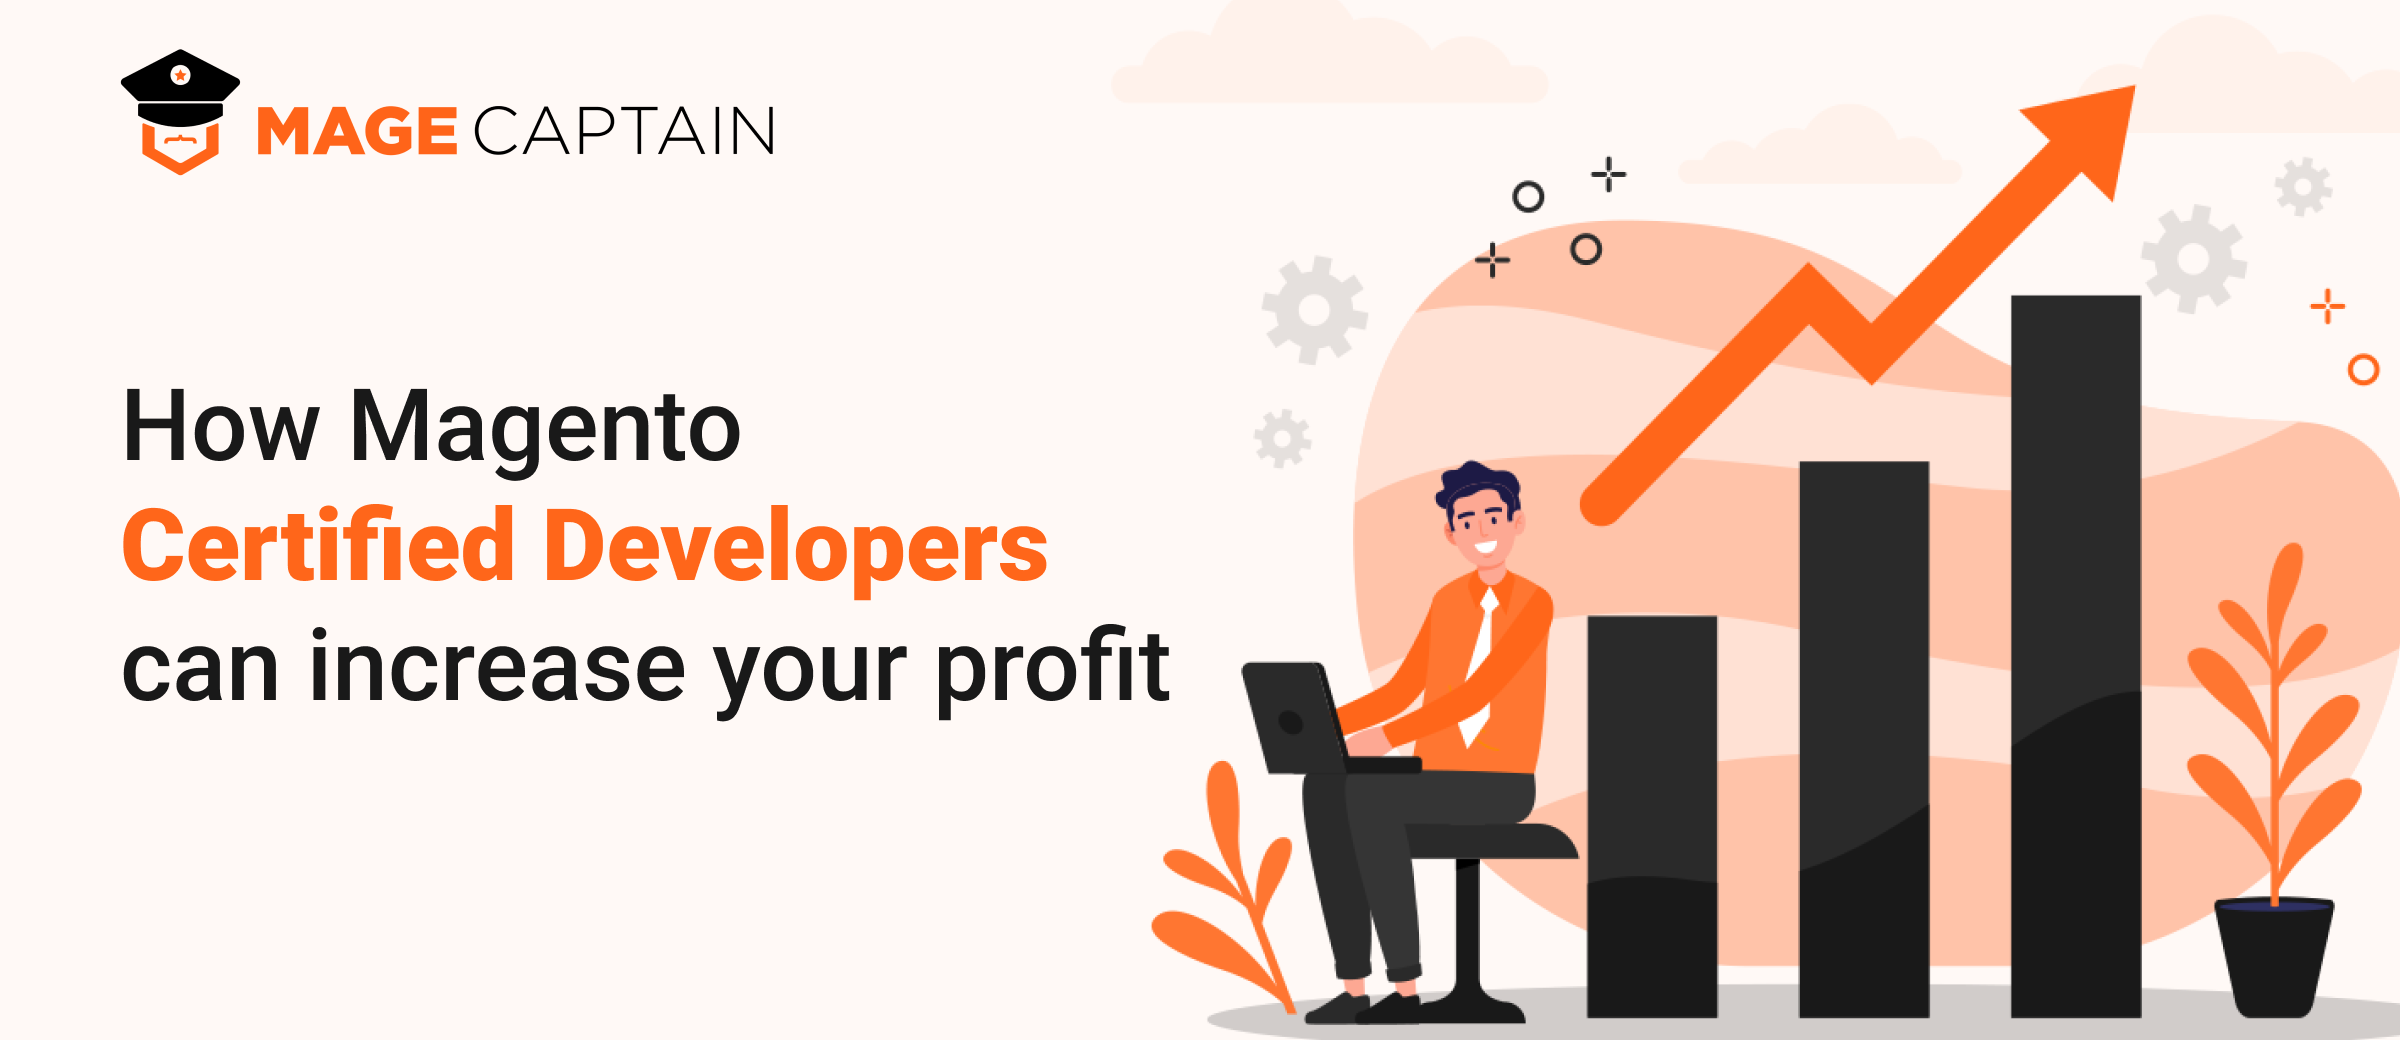 How Magento certified developers can increase your profit